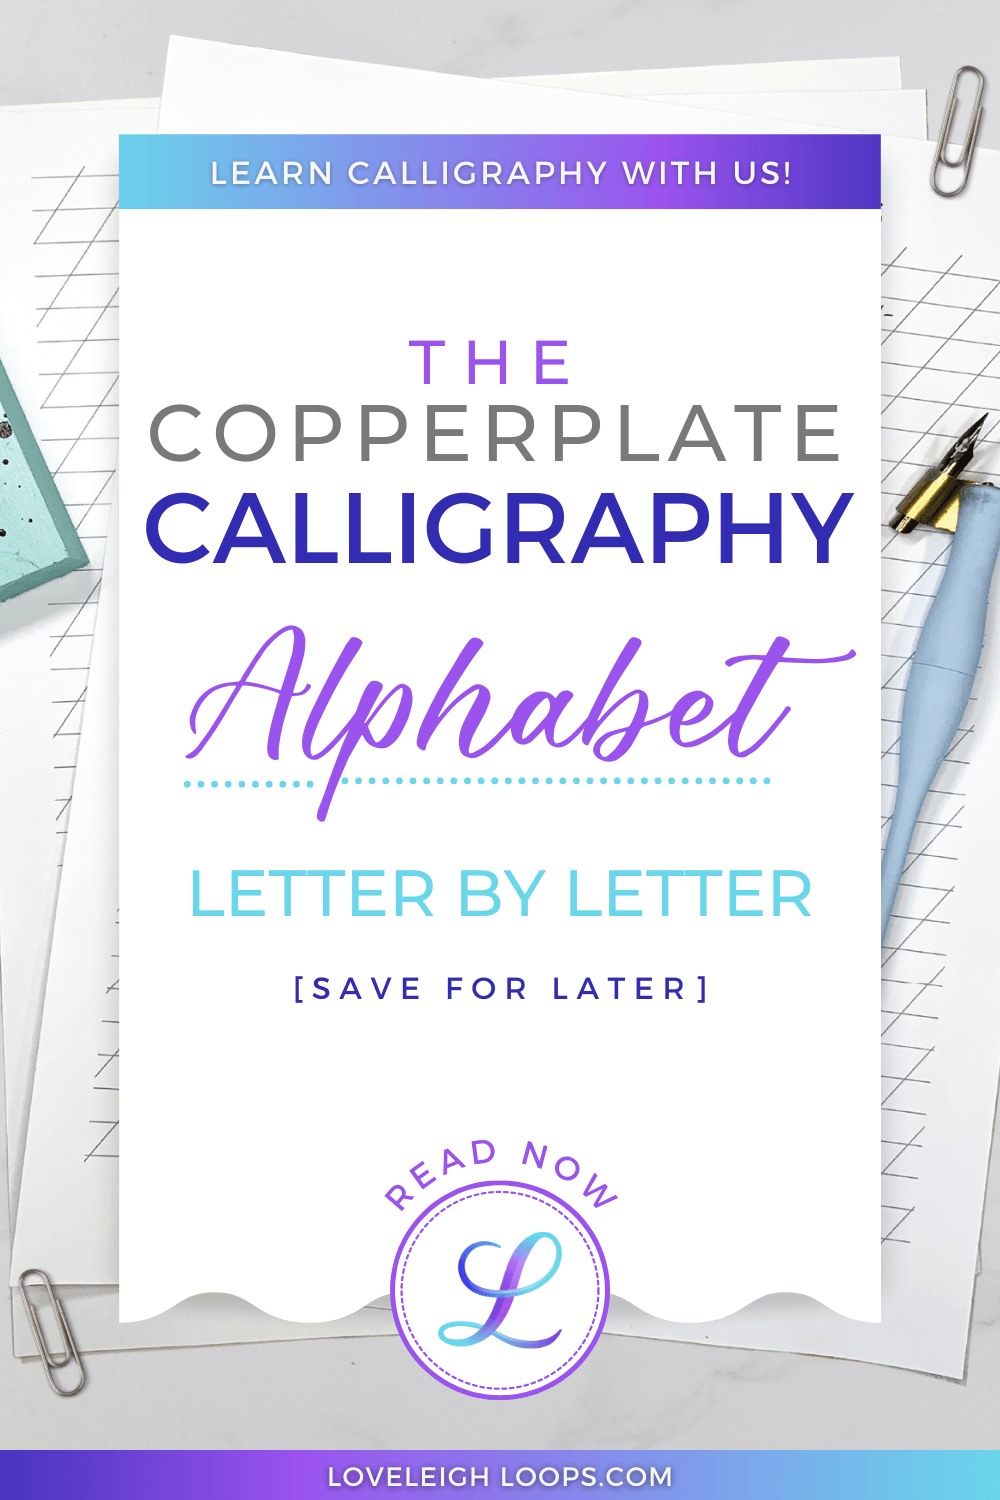 Copperplate Calligraphy Workbook (Paperback)